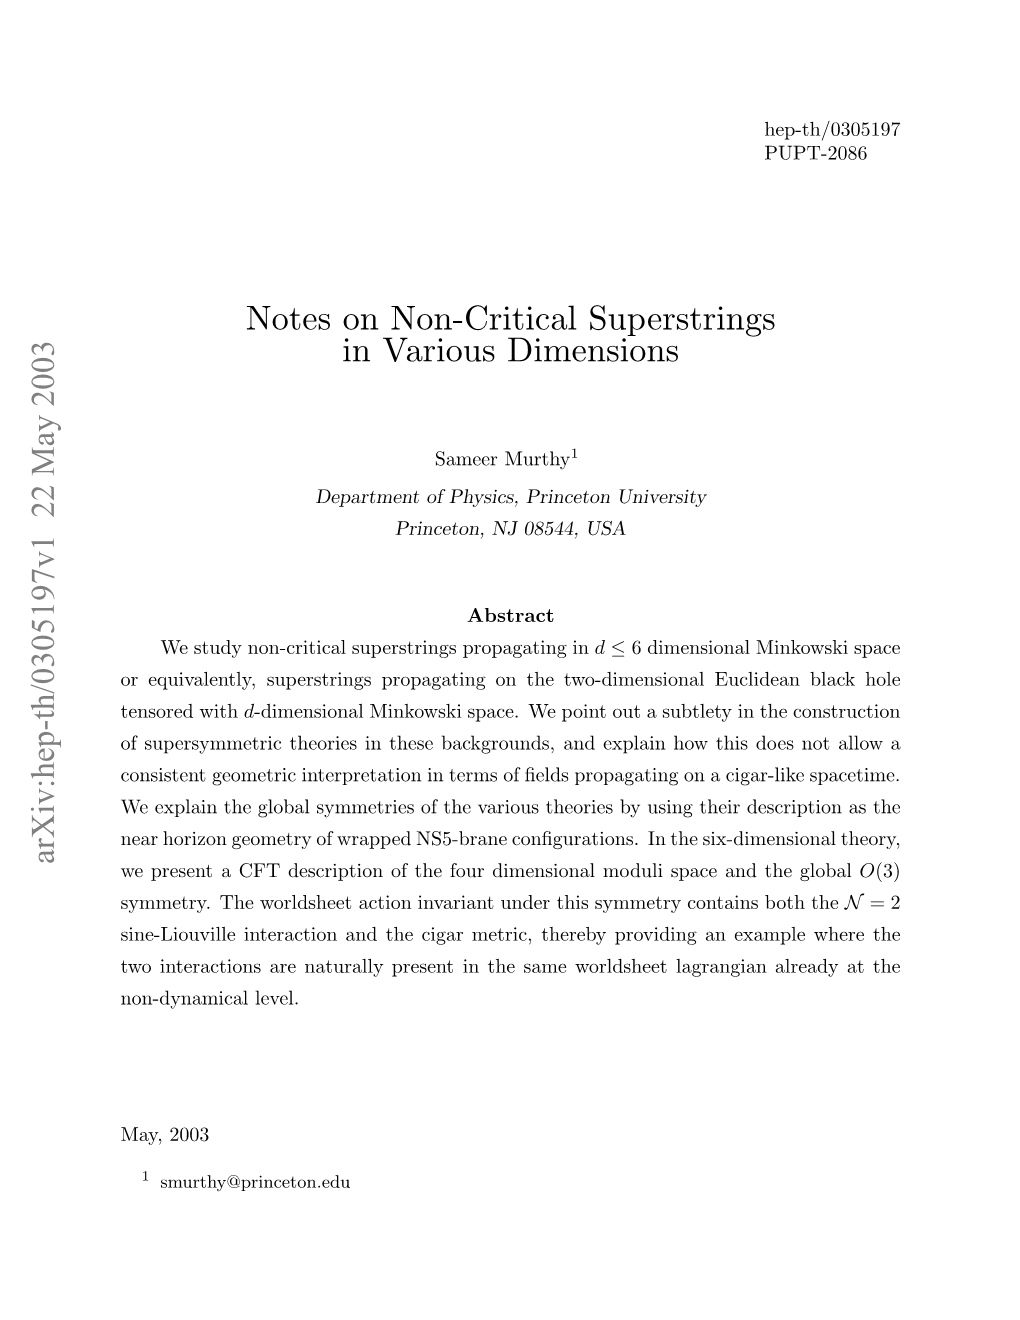 Notes on Non-Critical Superstrings in Various Dimensions